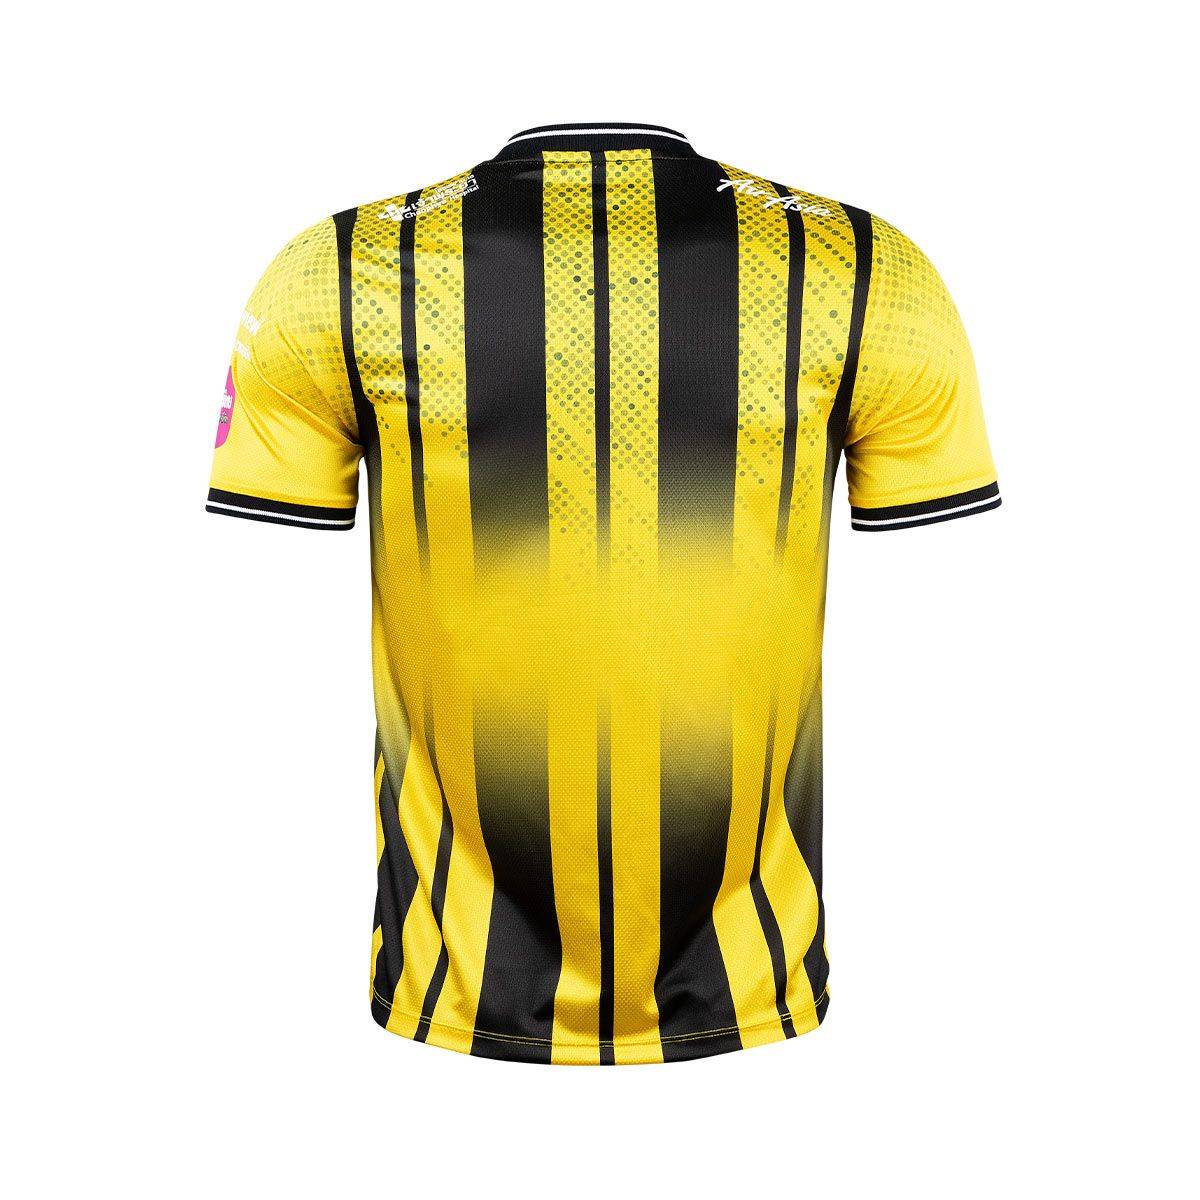 2021 Police Tero Authentic Thailand Football Soccer League Jersey Shirt ...